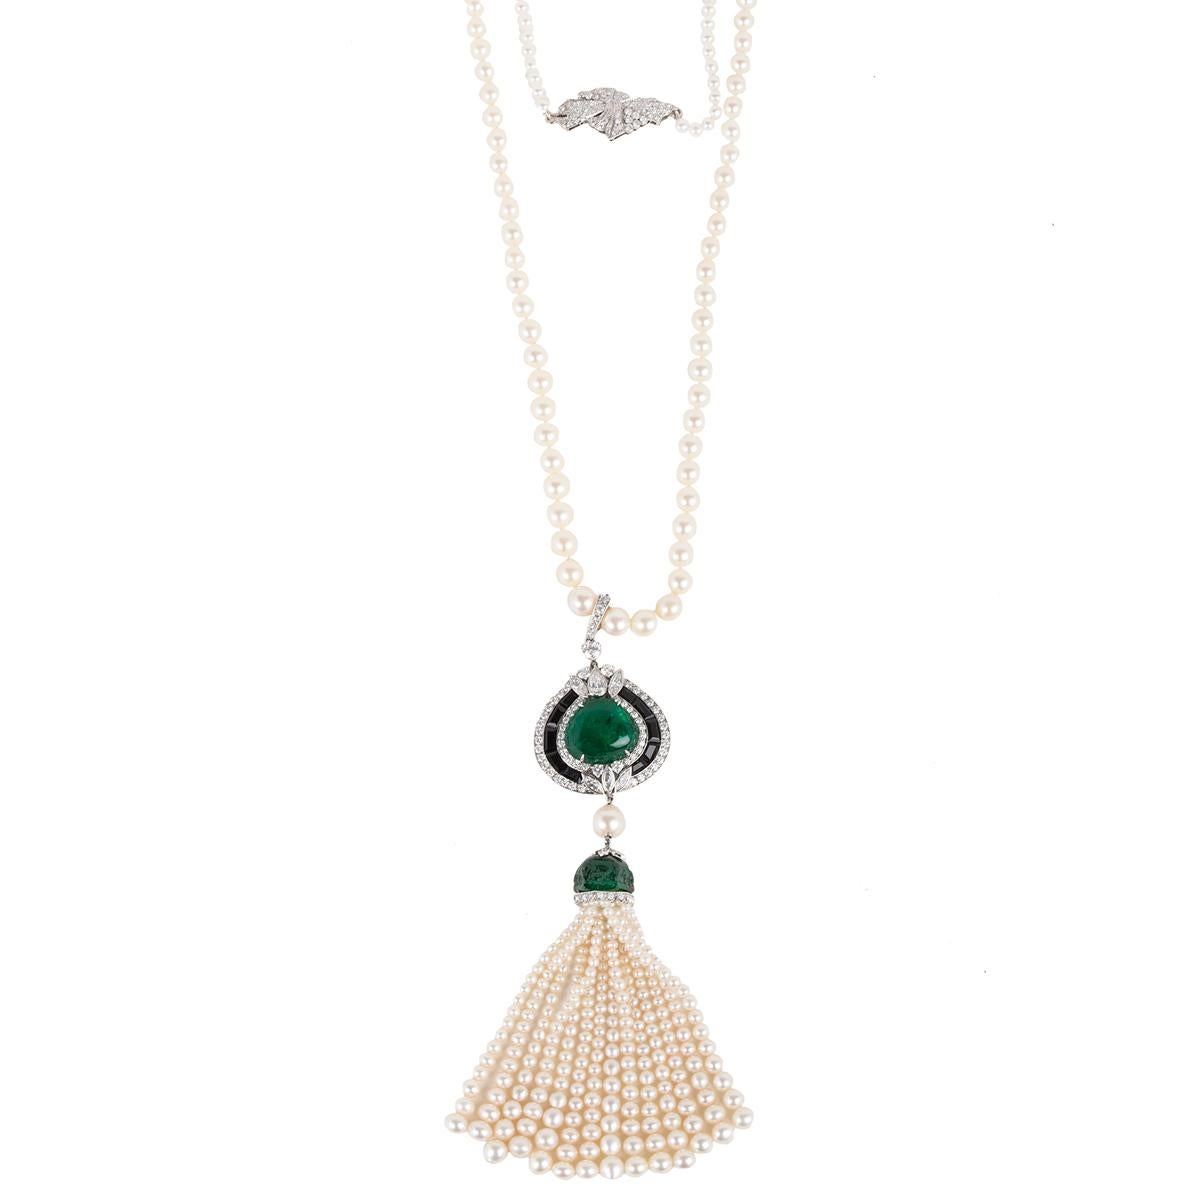 a long graduated chain with freshwater pearl
20 carat Heart-Shaped Cab Emerald Pendant
Graduated Tassel with carved Emerald umbrella
Platinum Clasp with diamonds
